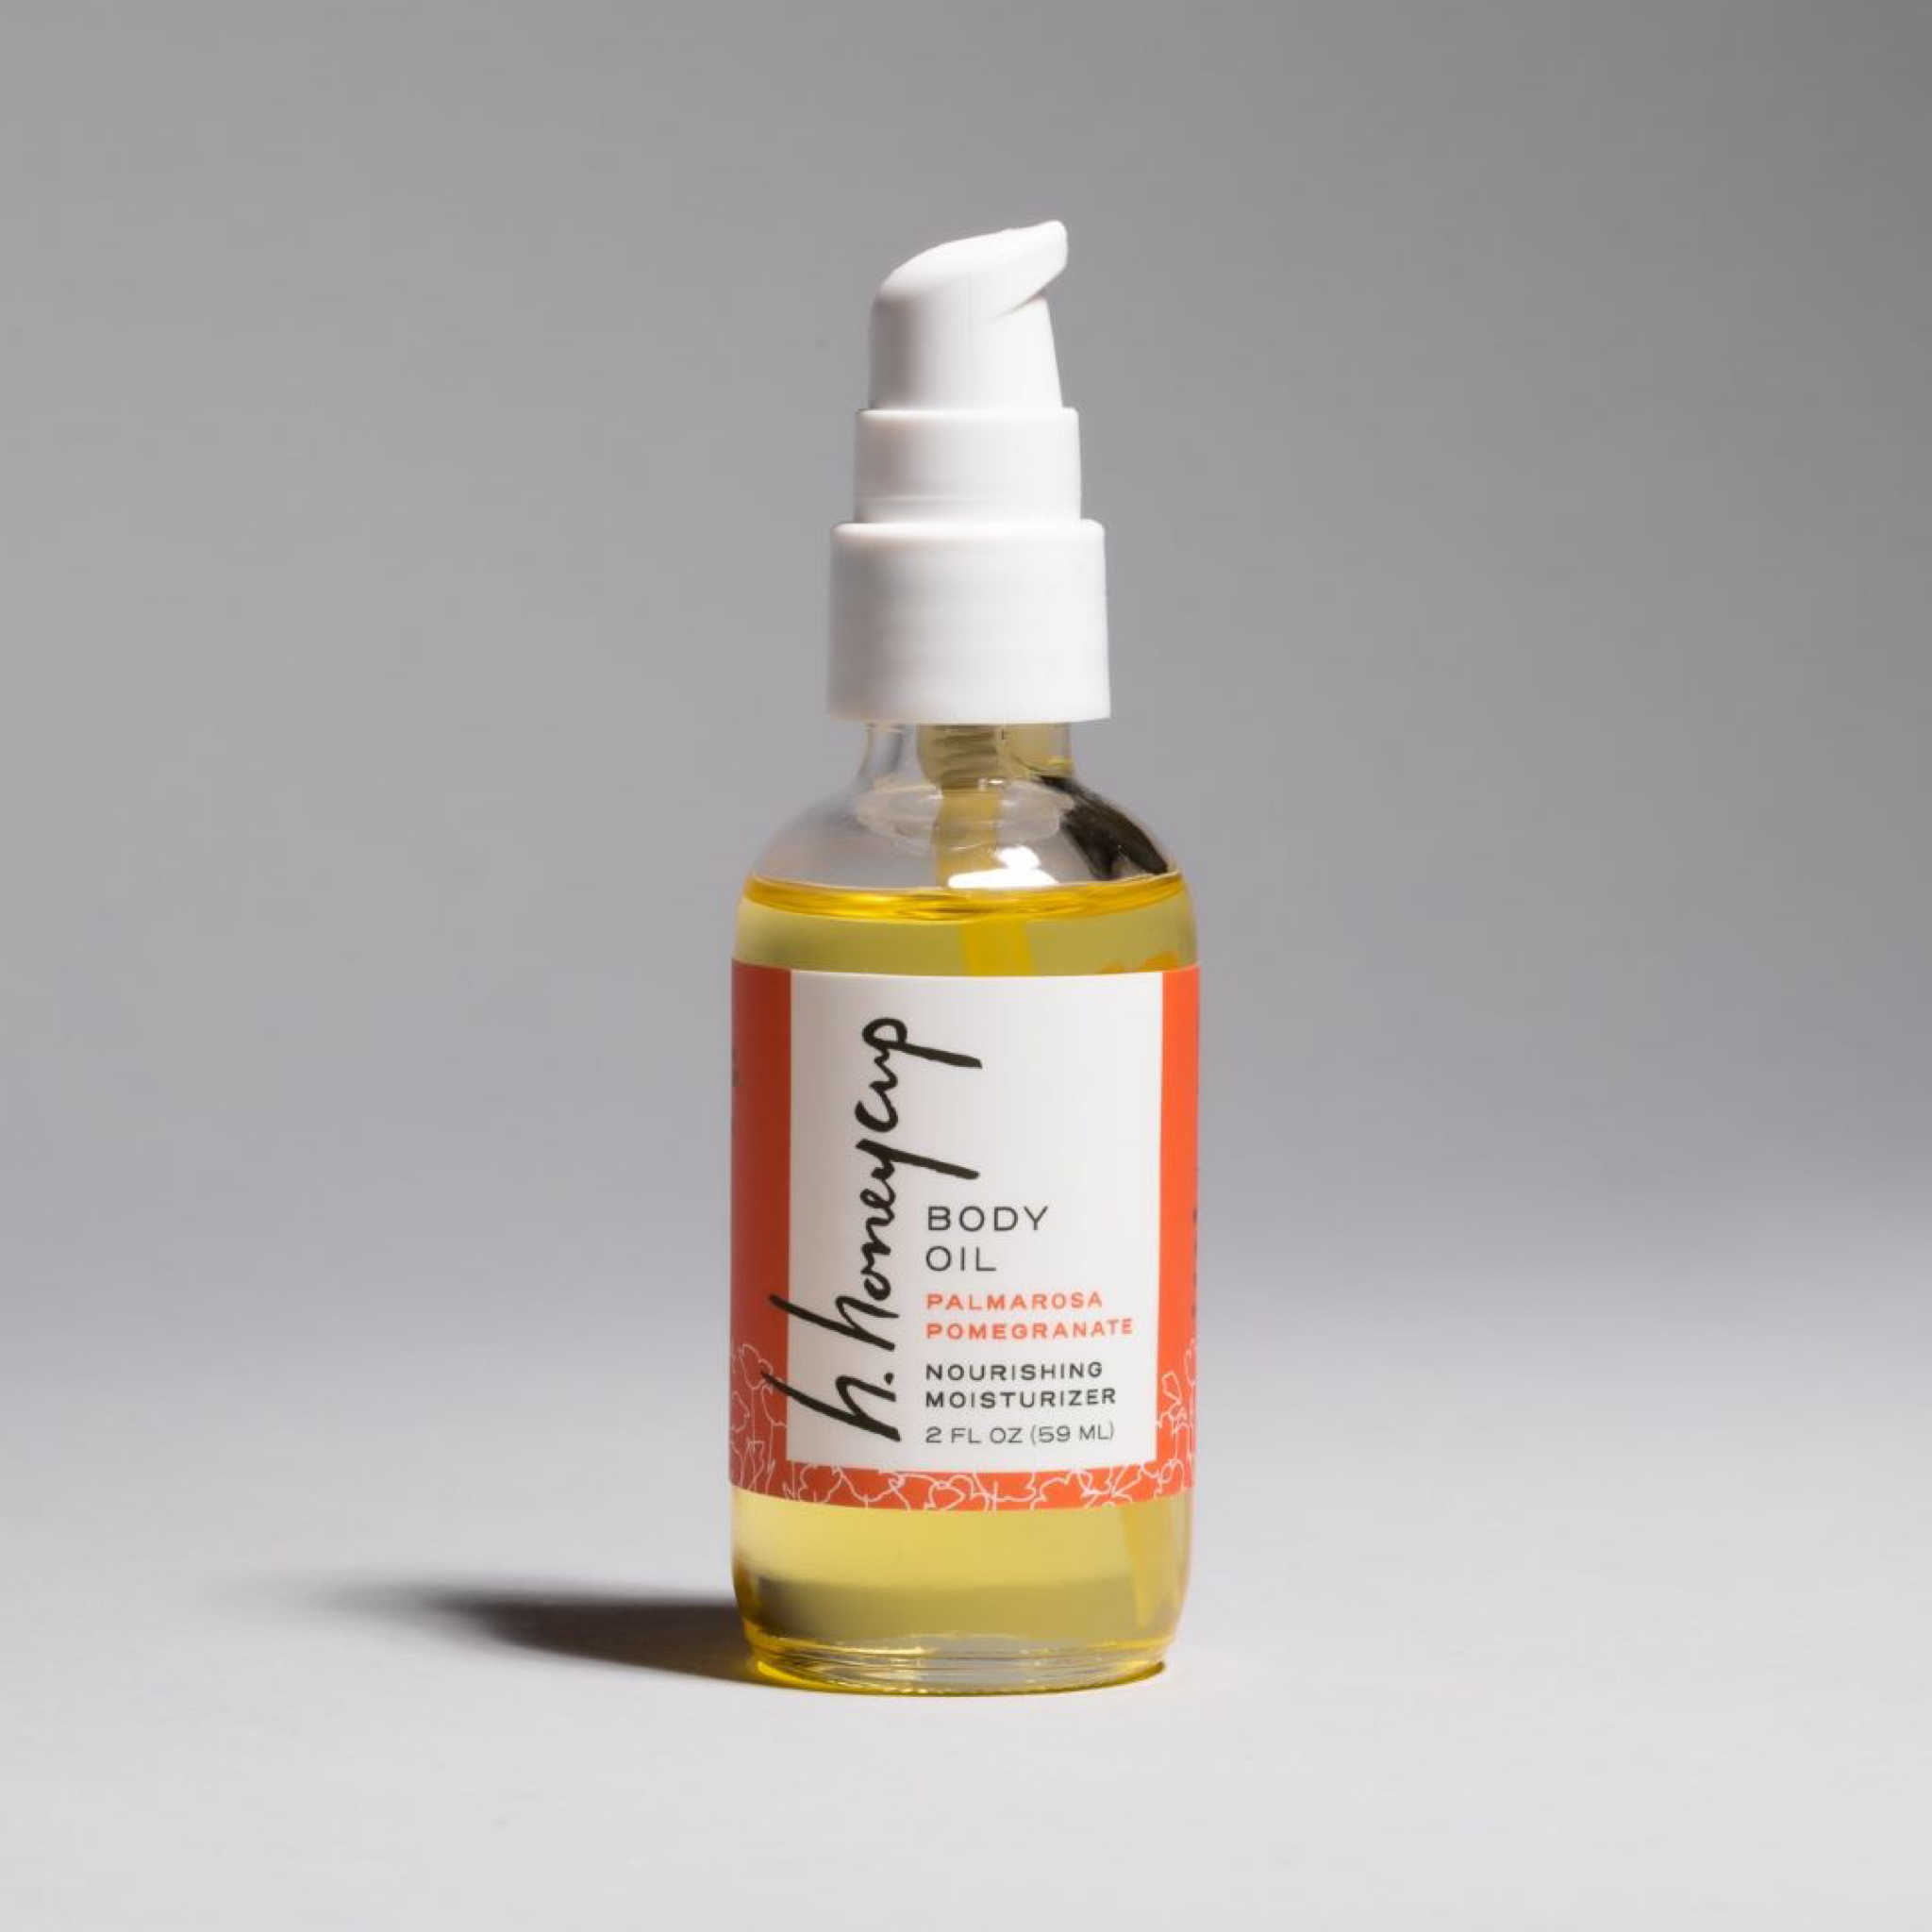 Palmarosa with lavender natural body oil. Product is a beautiful yellow color in 2 oz recyclable glass bottle with spray top